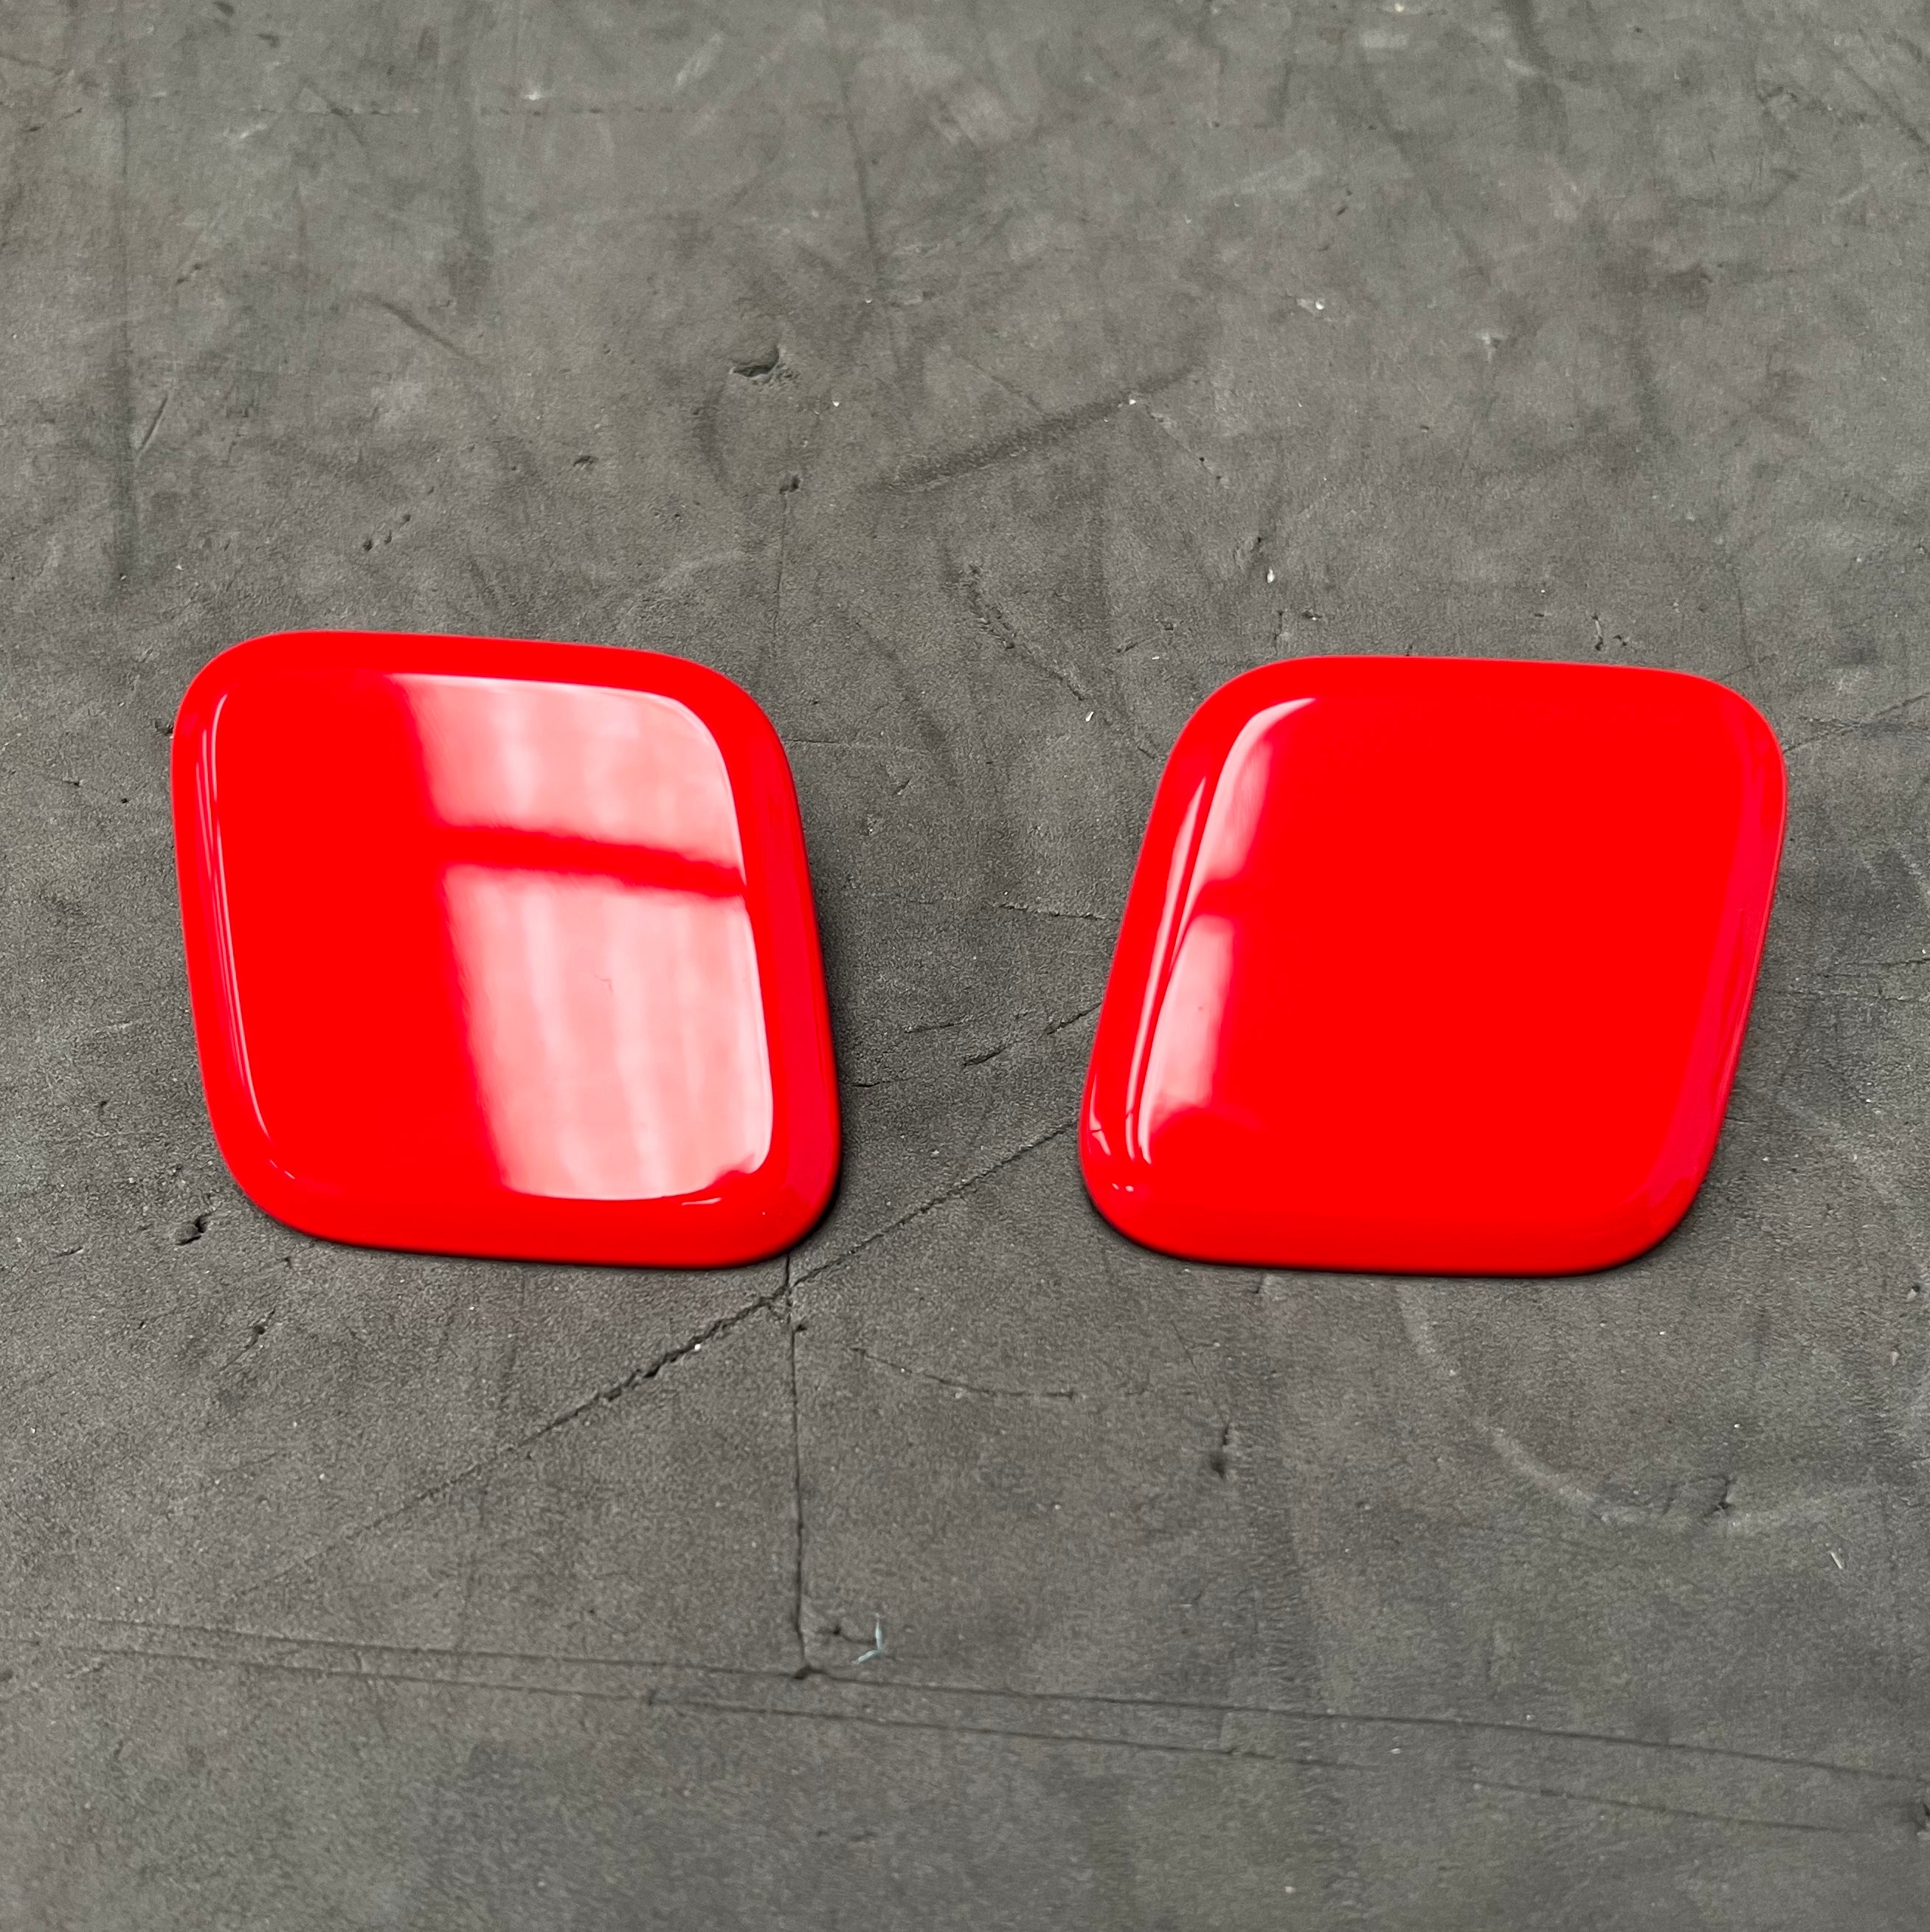 Genuine Ford Headlight Washer Covers - Mk3.5 Ford Focus RS